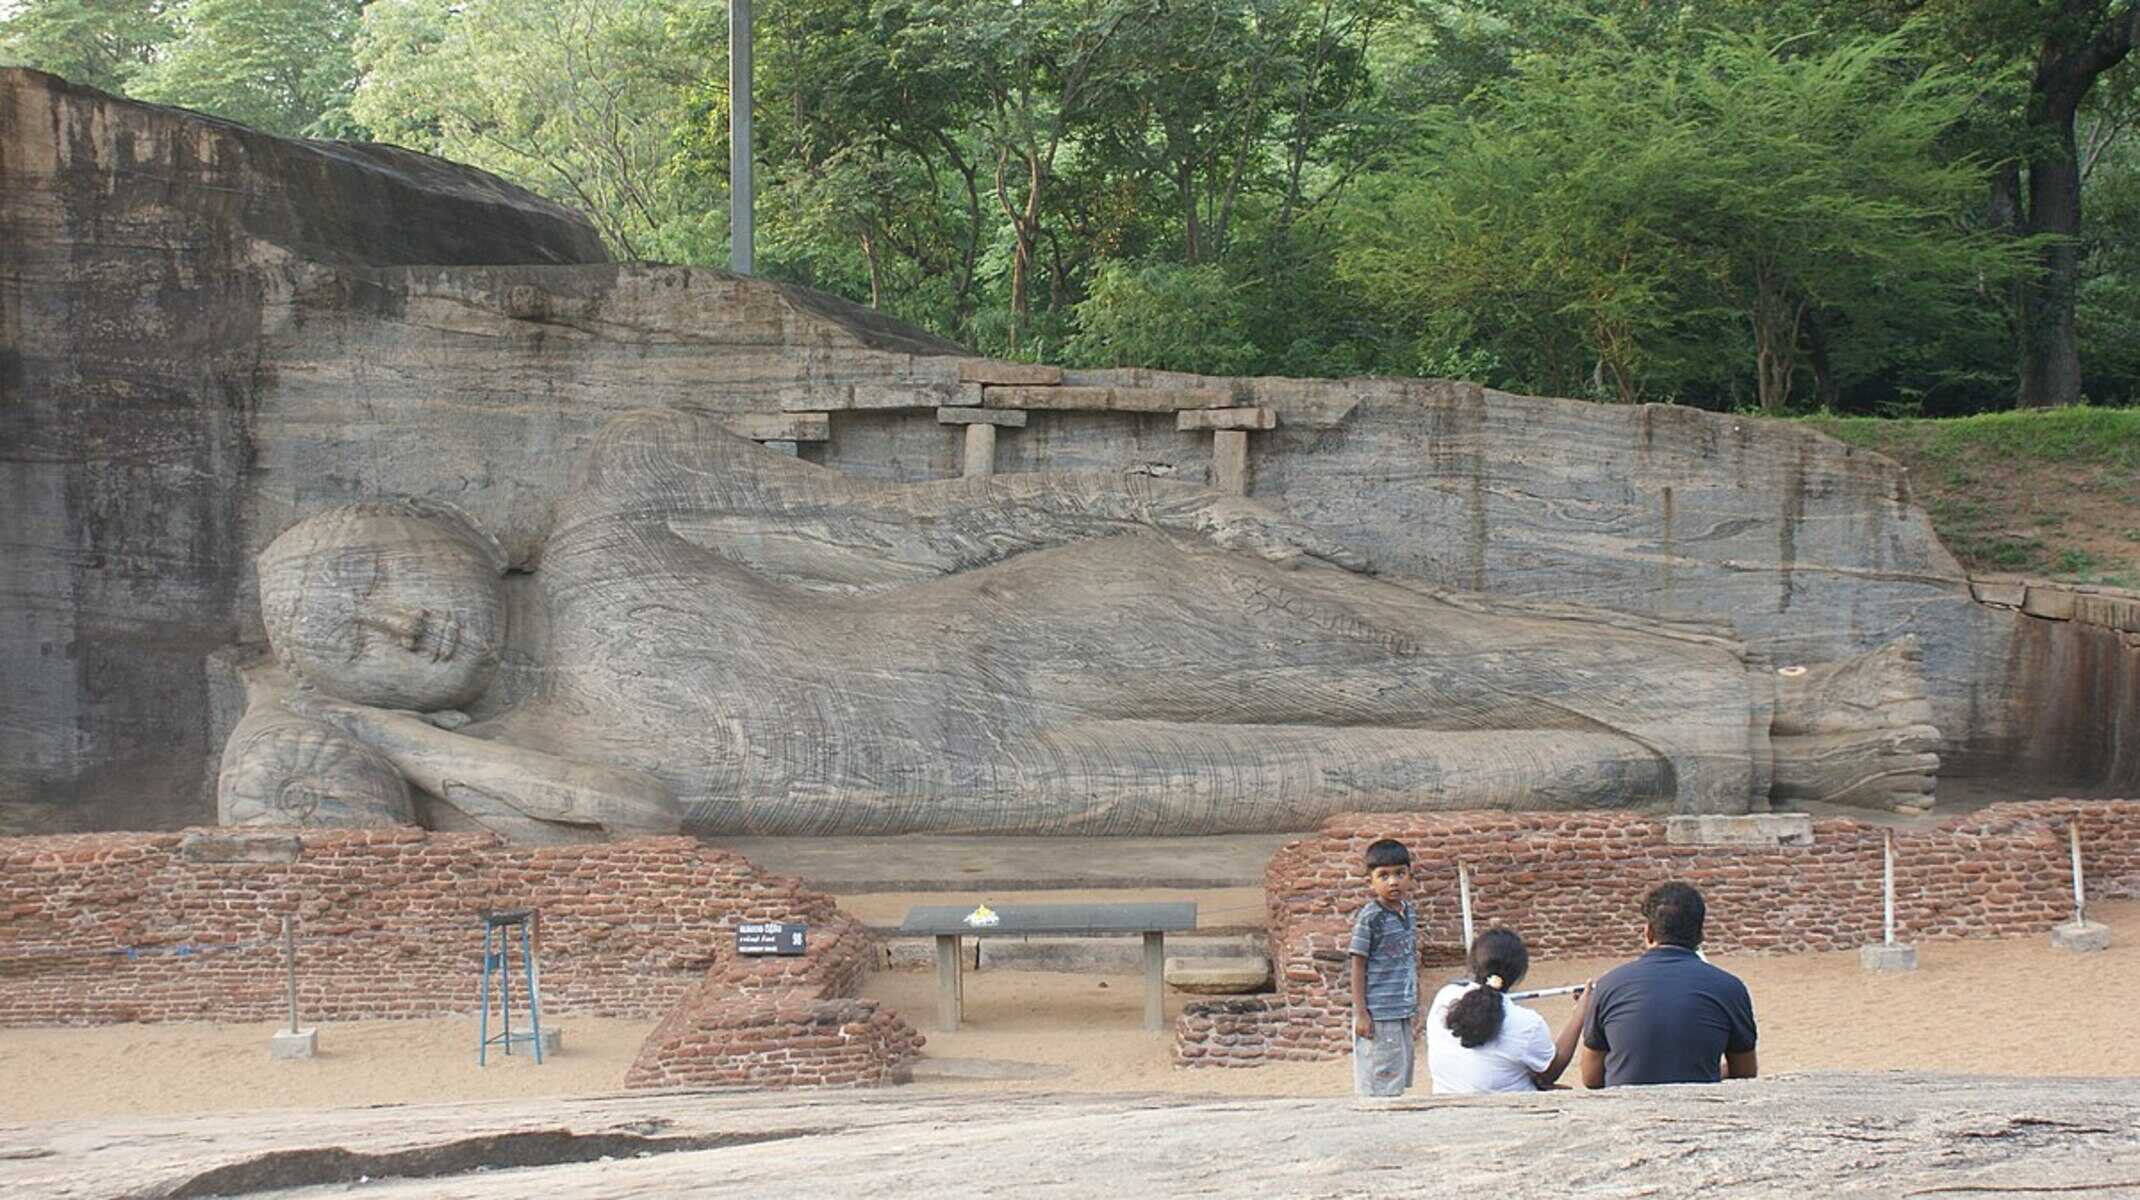 What Helped Preserve The Colossal Sculpture Parinirvana Of The Buddha At Gal Vihara?